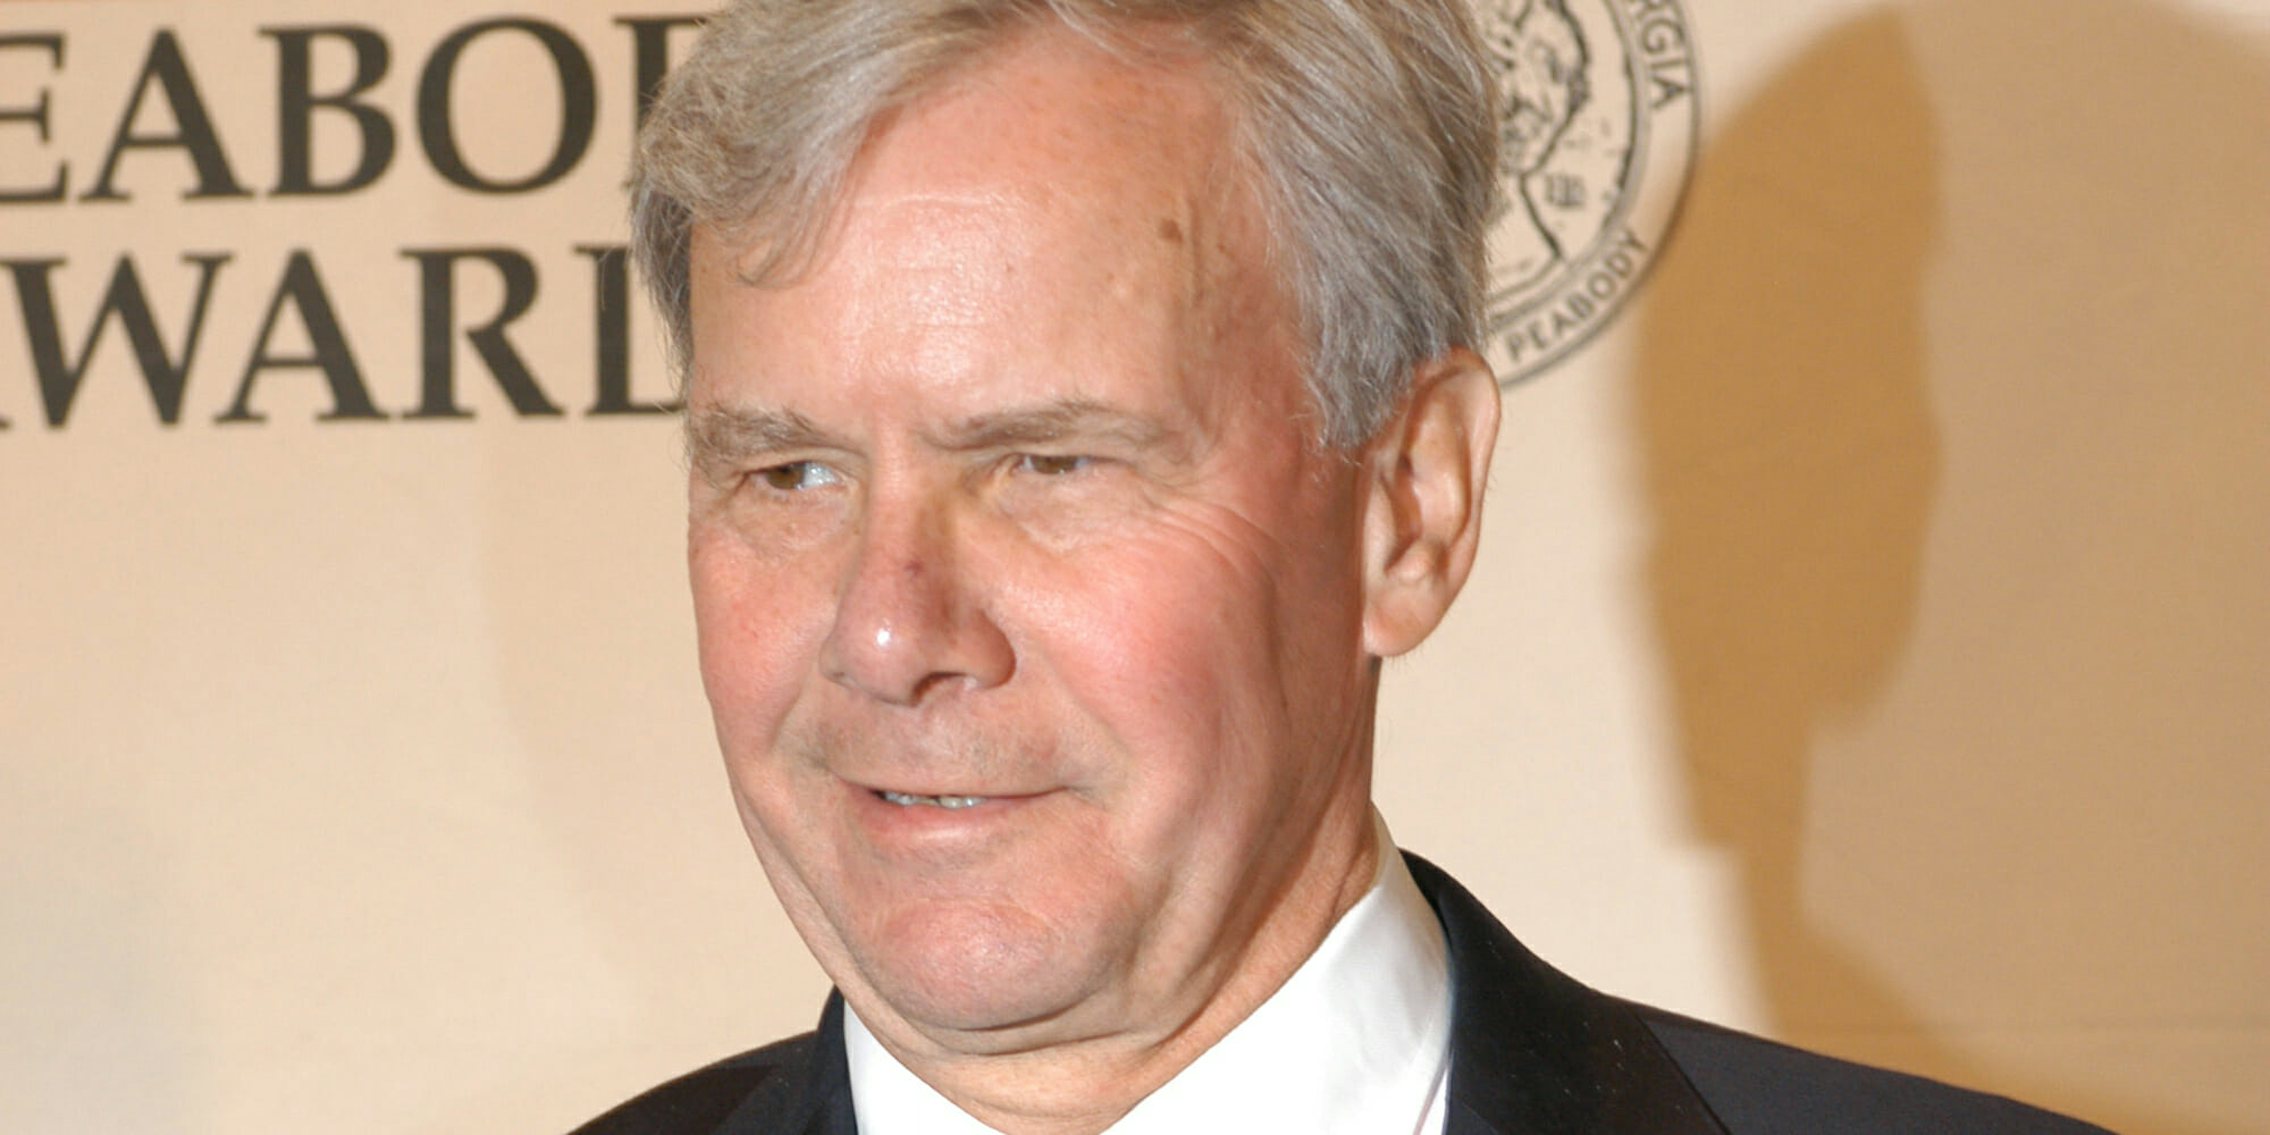 A third woman has accused Tom Brokaw of sexual harassment.